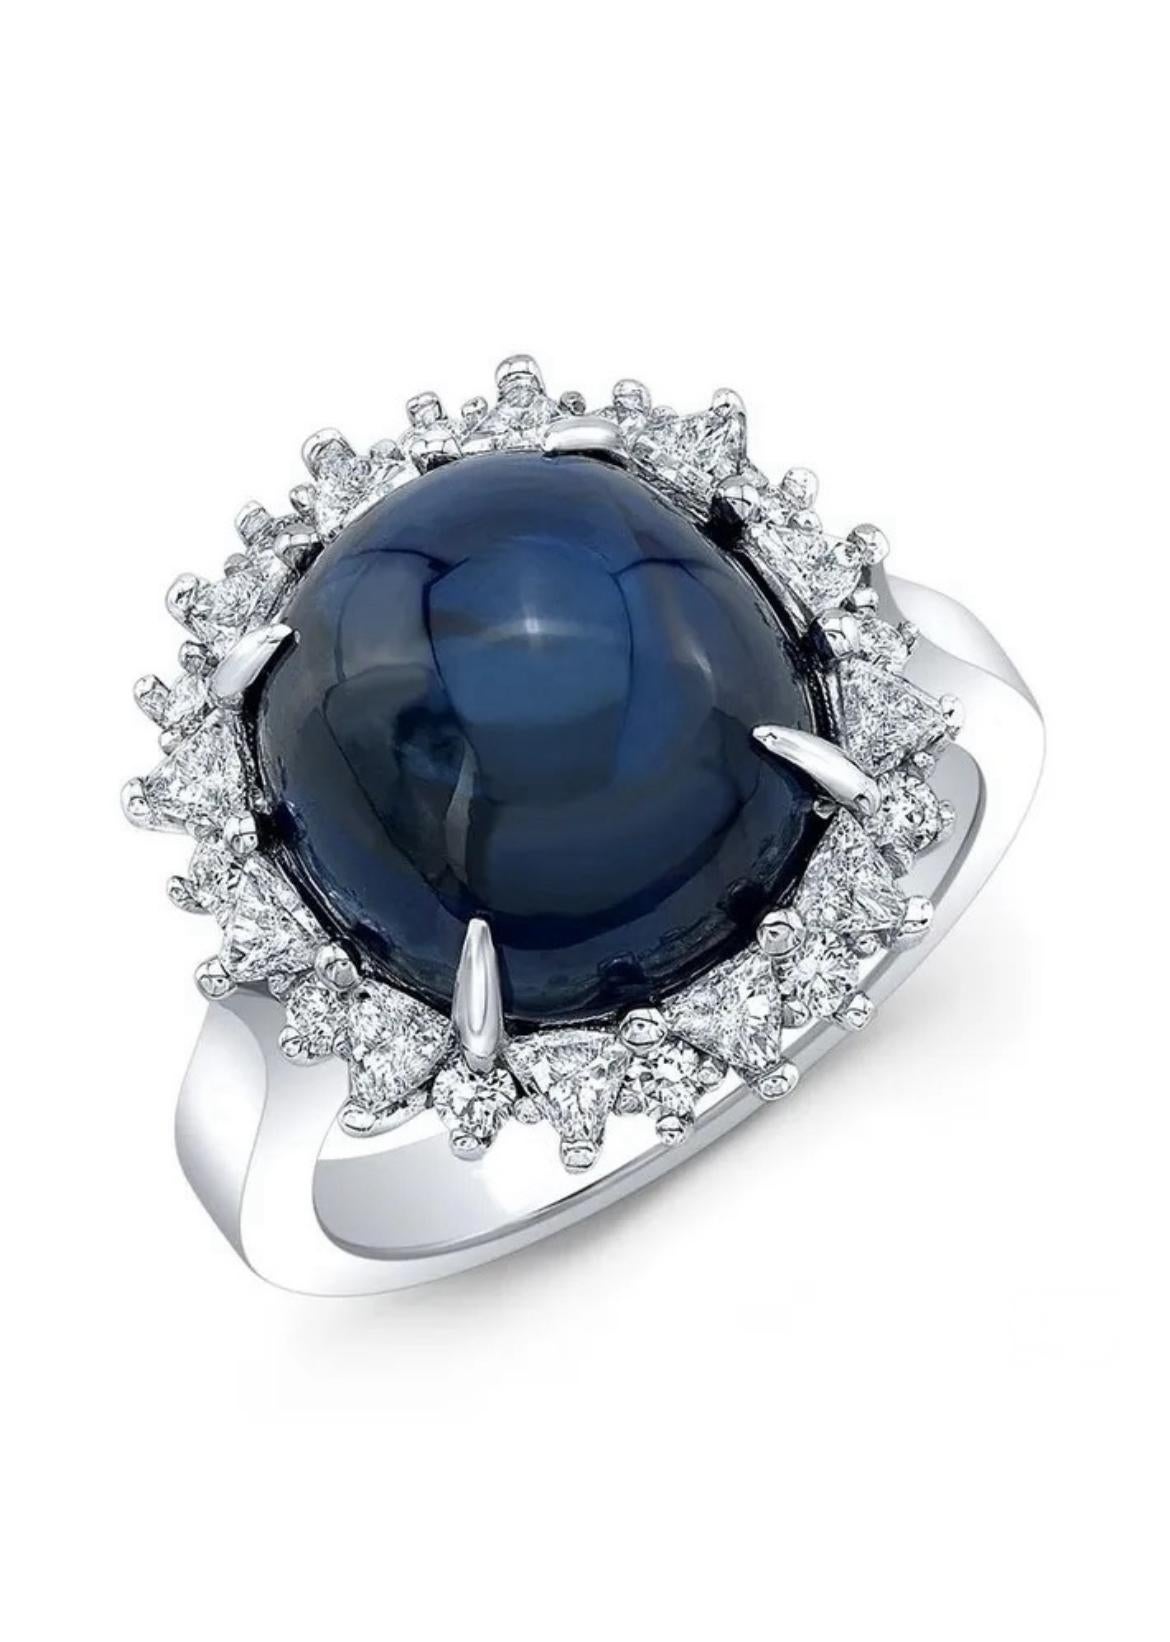 An alluring 11.72-carat, cabochon blue sapphire from Sri Lanka is centered upon this intricate platinum ring. 

Supported by 24 glittering trillion-cut and round white diamonds weighing 0.67 carats, it's a drop of the night sky encircled by